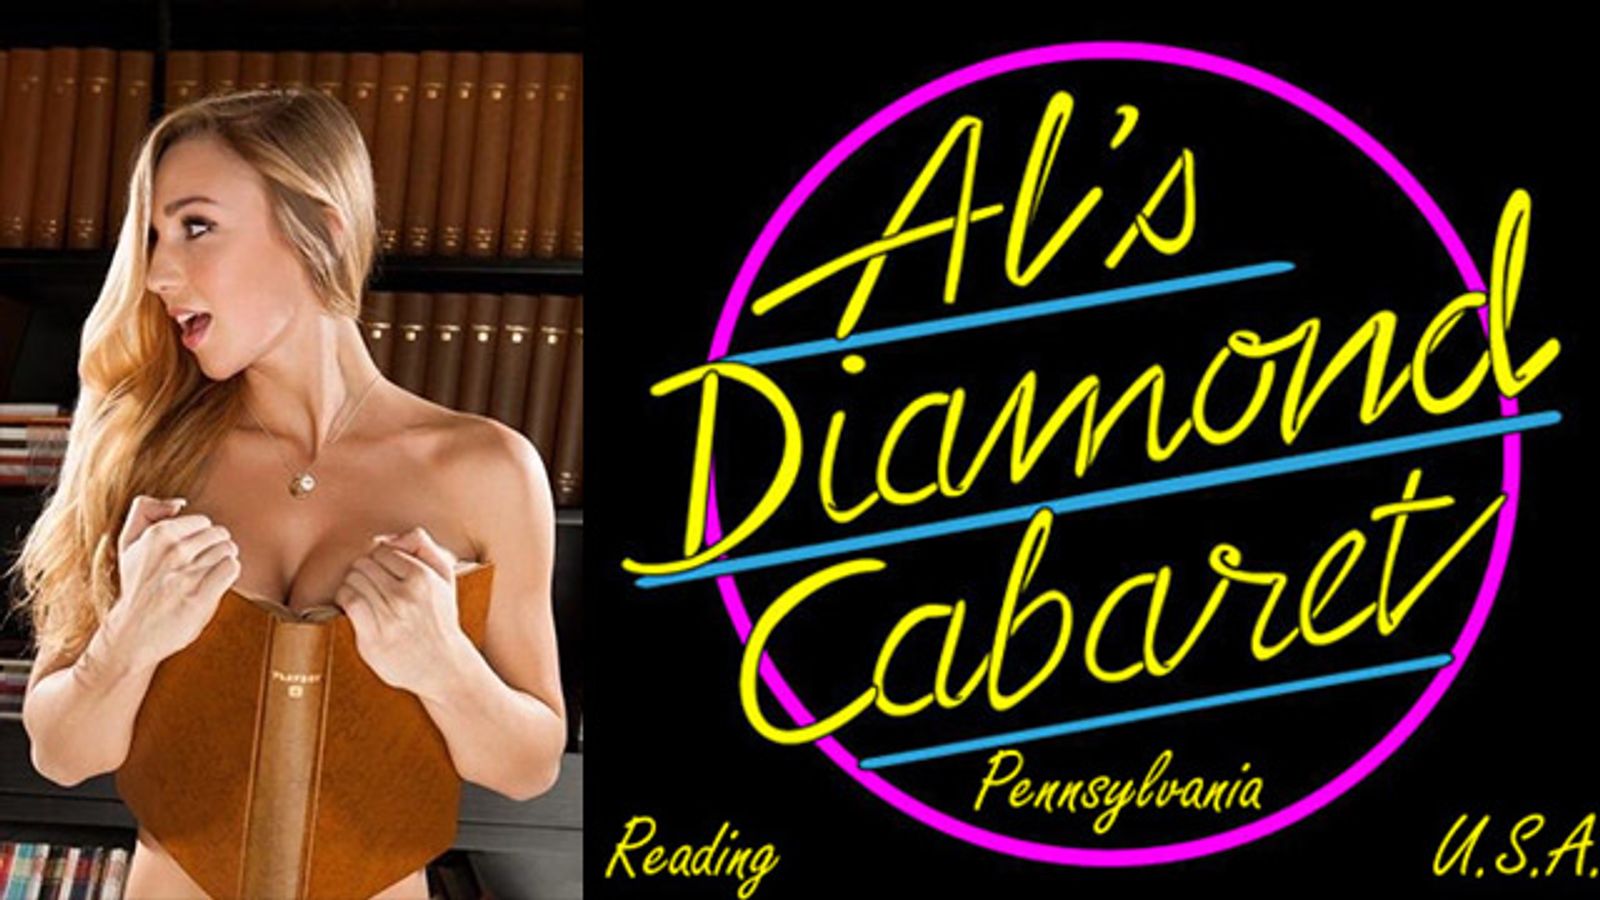 'Library Girl' to Appear at Al’s Diamond Cabaret April 1 & 2